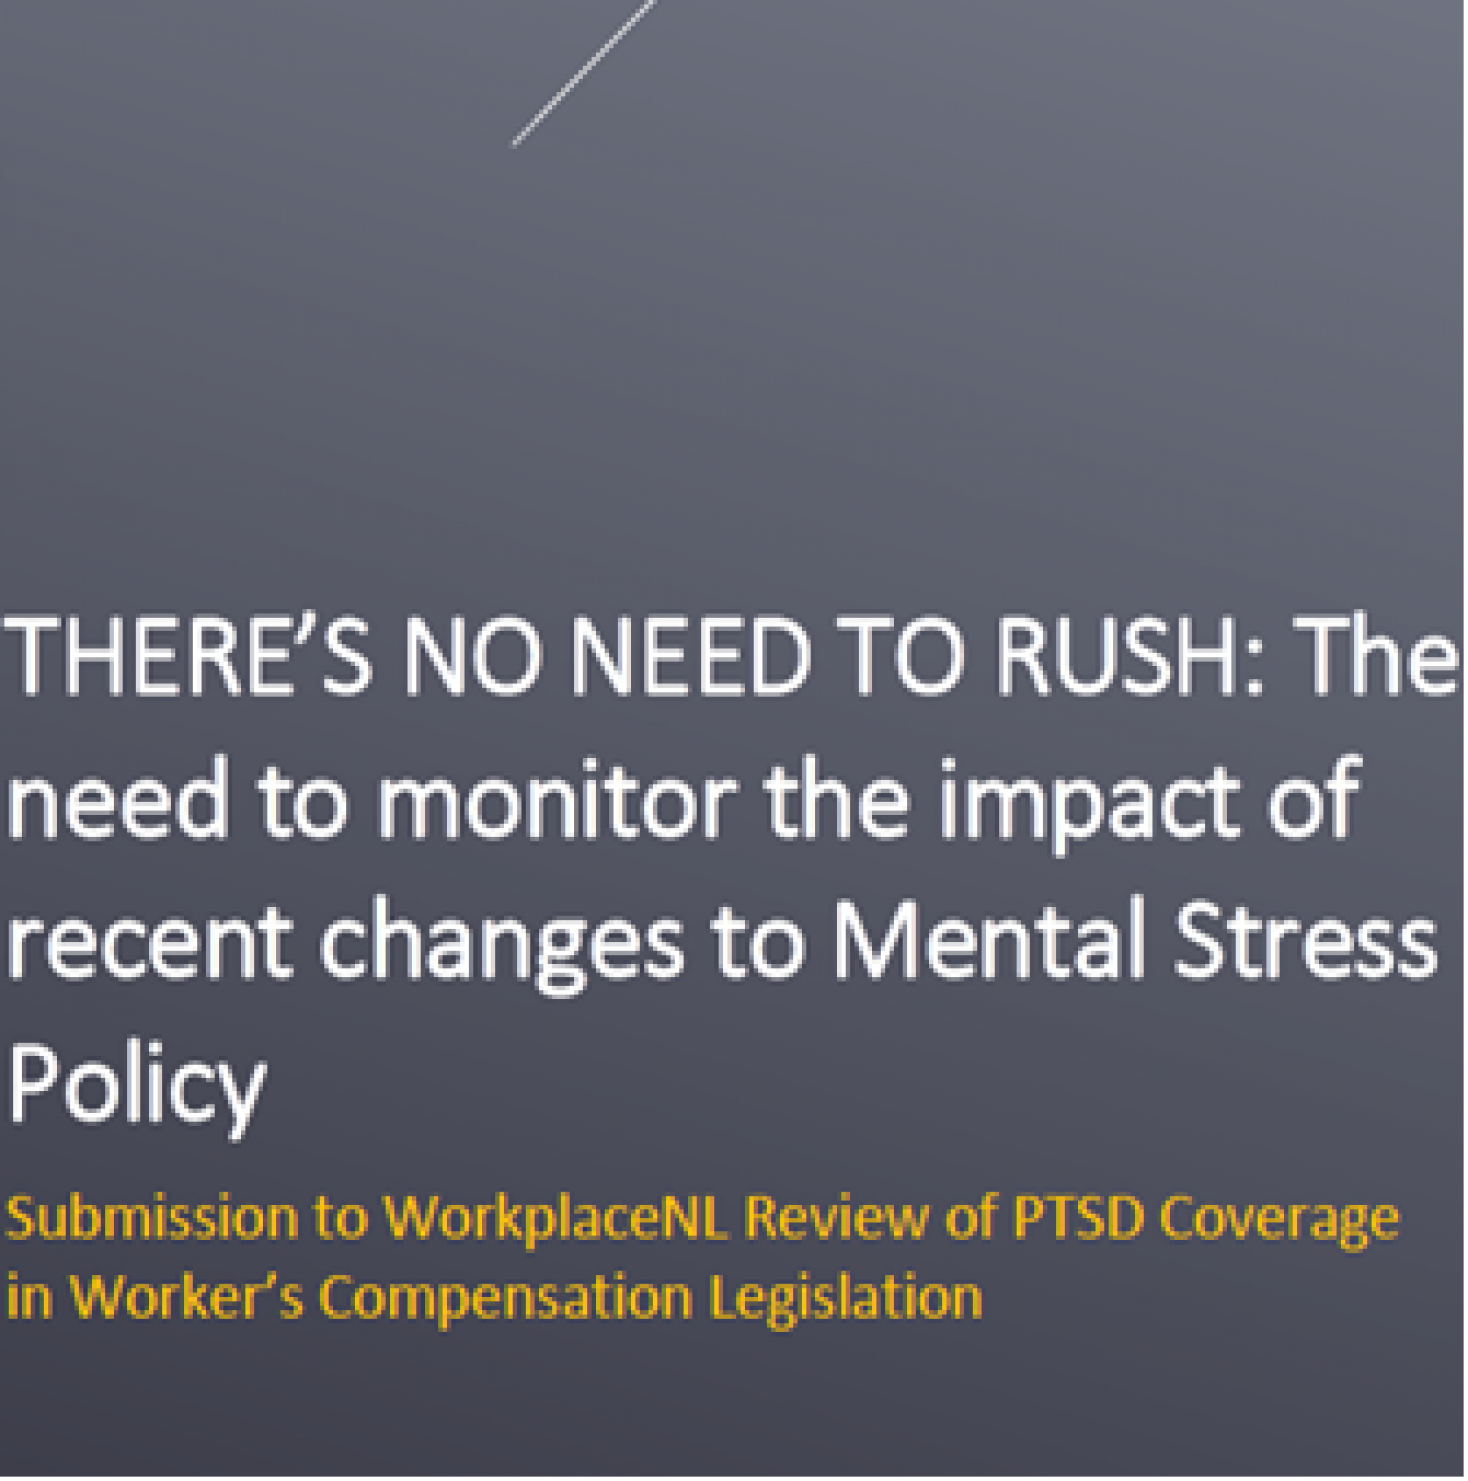 Submission to WorkplaceNL Review of PSTD Coverage in Worker’s Compensation Legislation